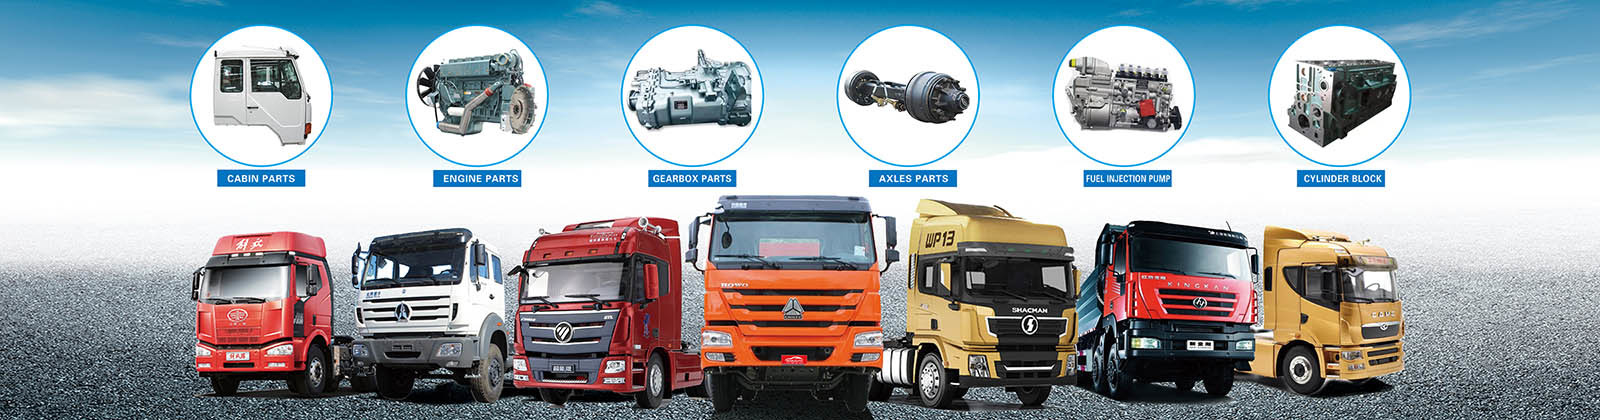 Faw Truck Spare Parts